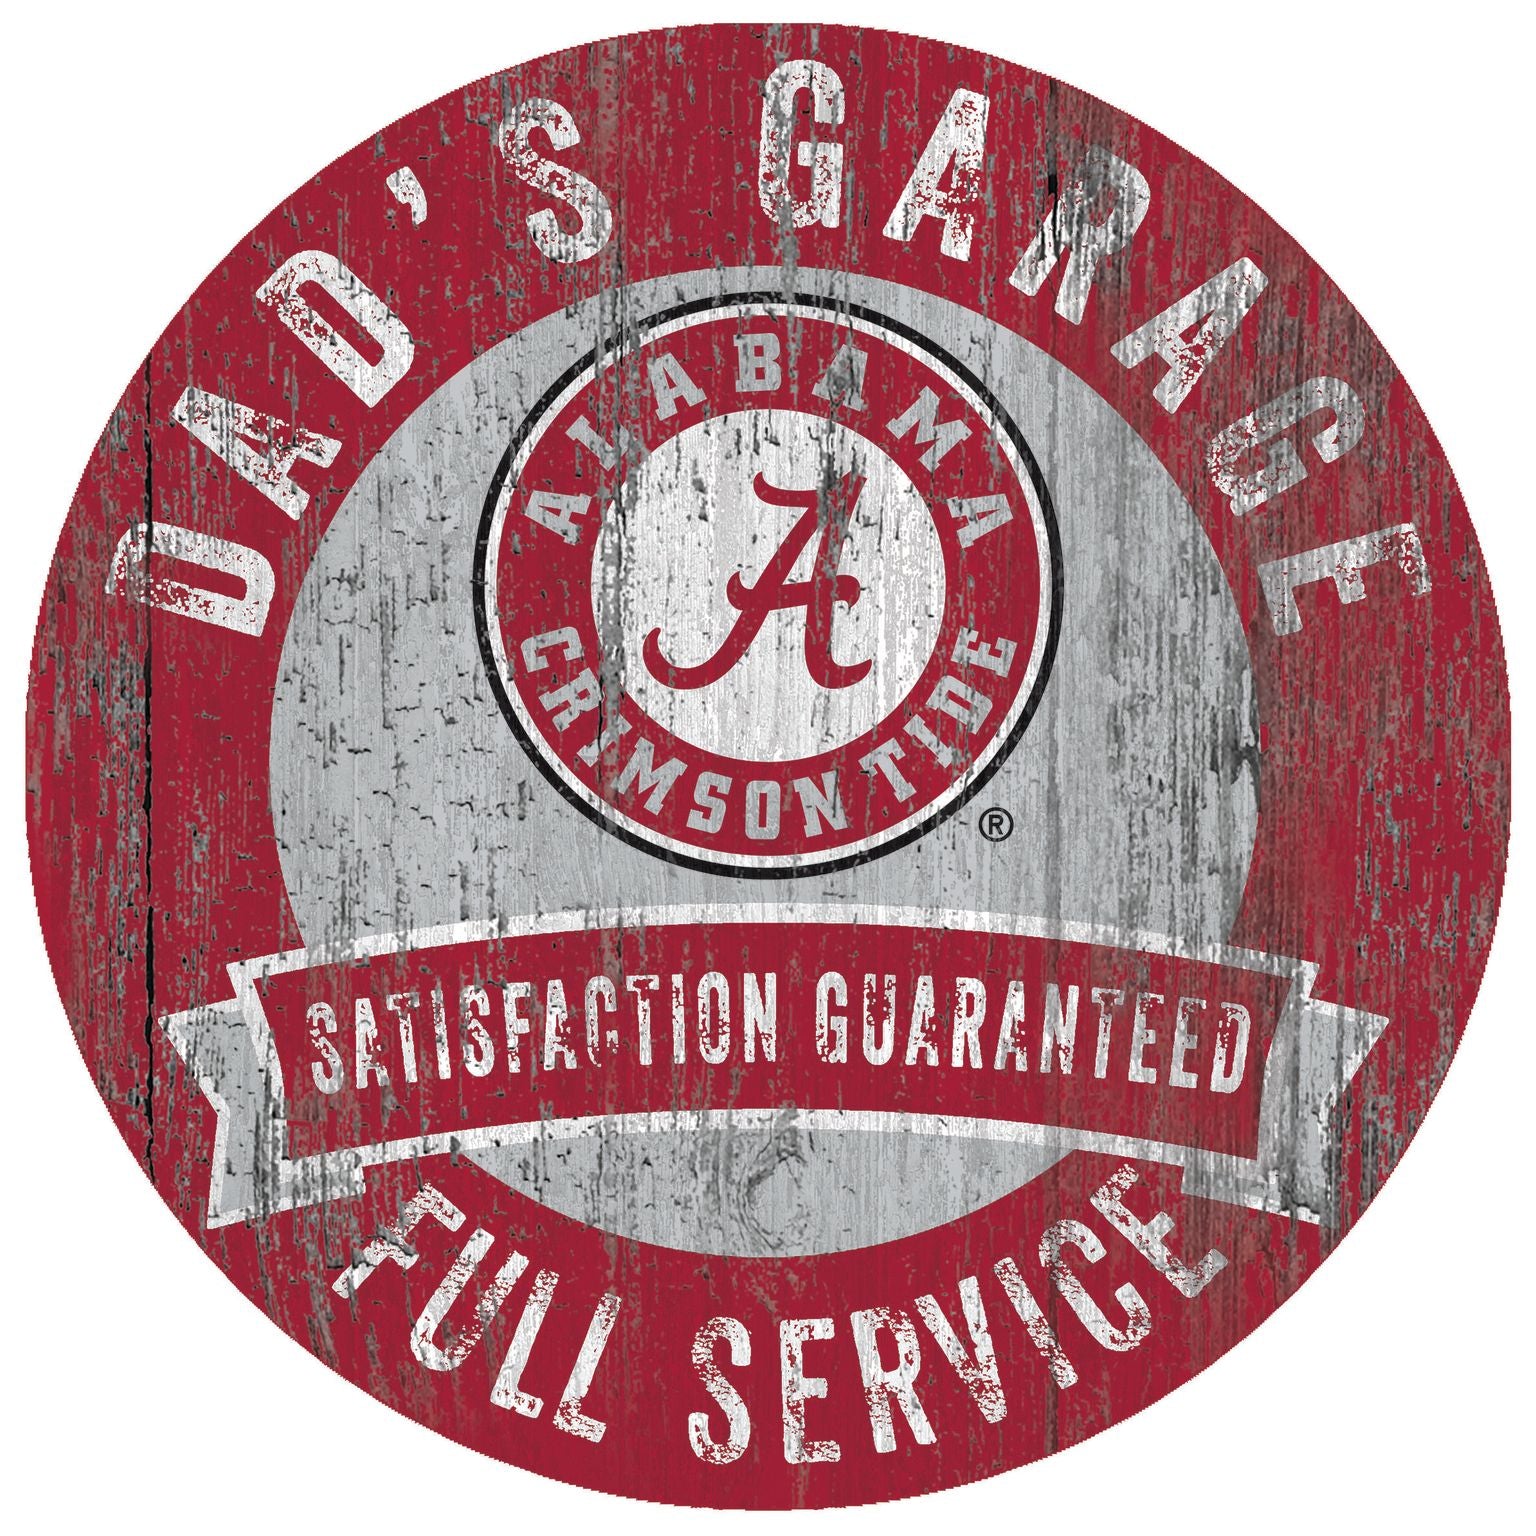 A round vintage sign with "Dad's Garage," "Full Service," "Satisfaction Guaranteed," and the Alabama Crimson Tide logo in the center.